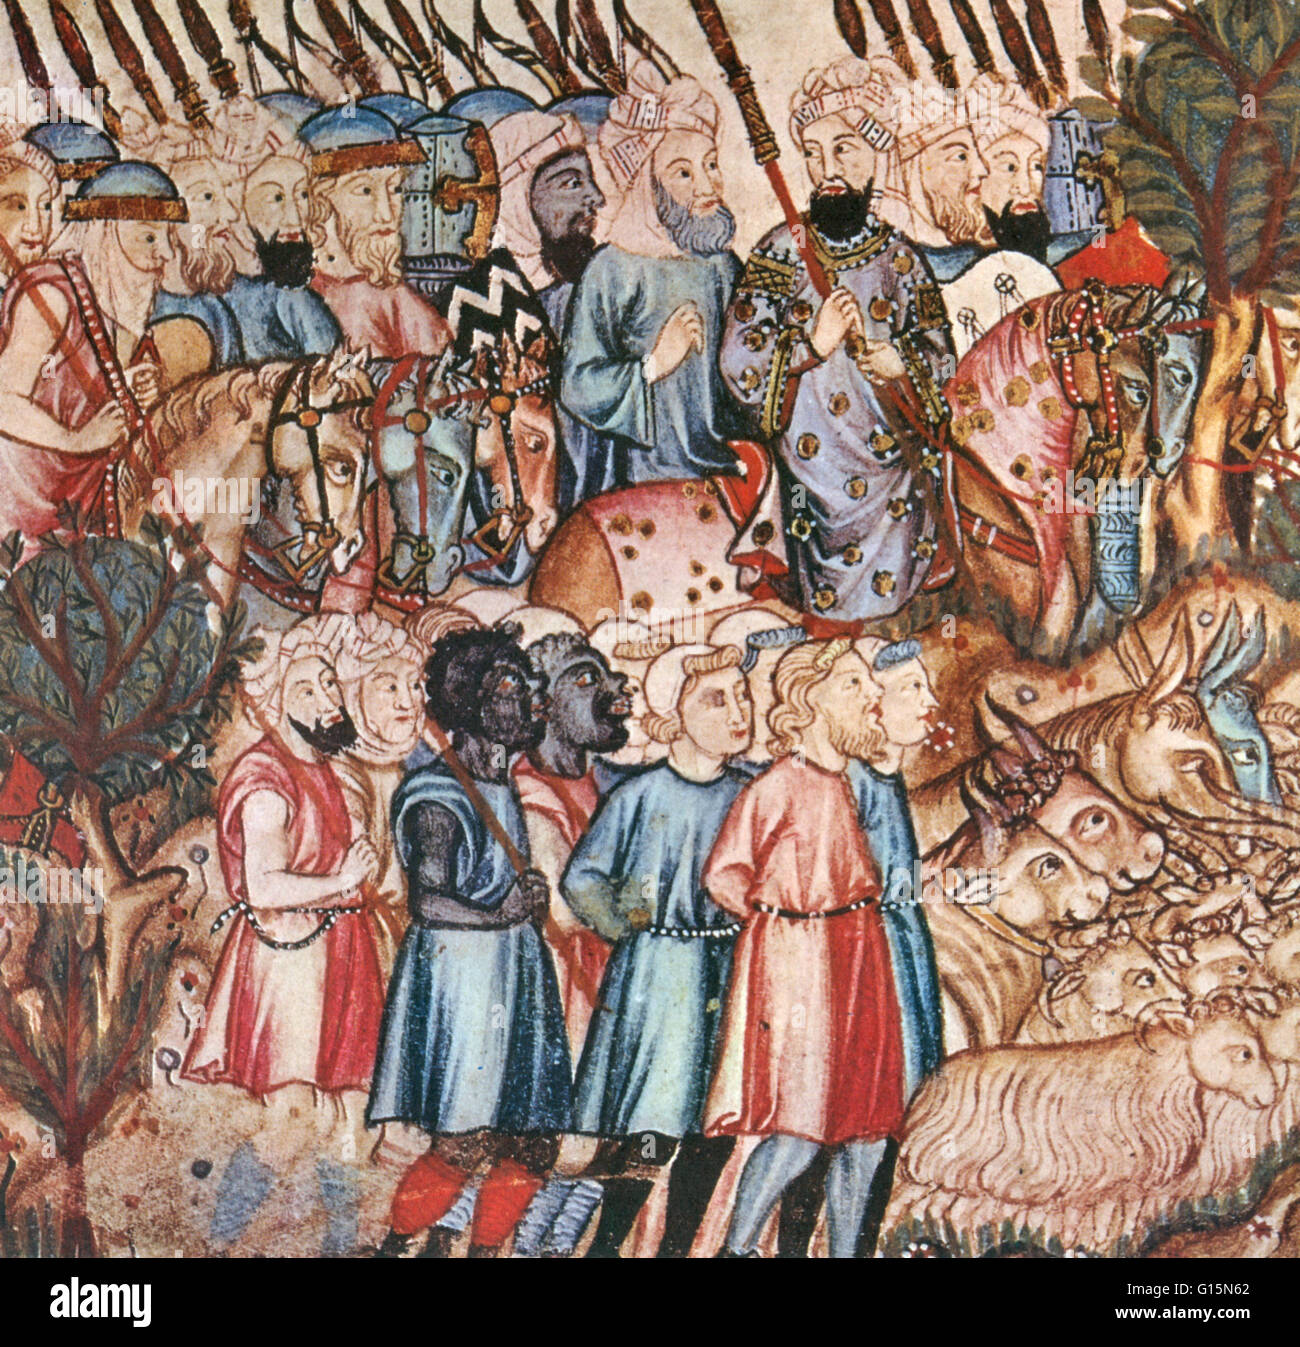 Christian prisoners of war. Note the similarity between the Christian captives and the Moorish foot soldiers, in contrast with the leader in his purple robes with silk and pearls. From the Cantigas de Santa Maria. The Umayyad conquest of Hispania is the i Stock Photo